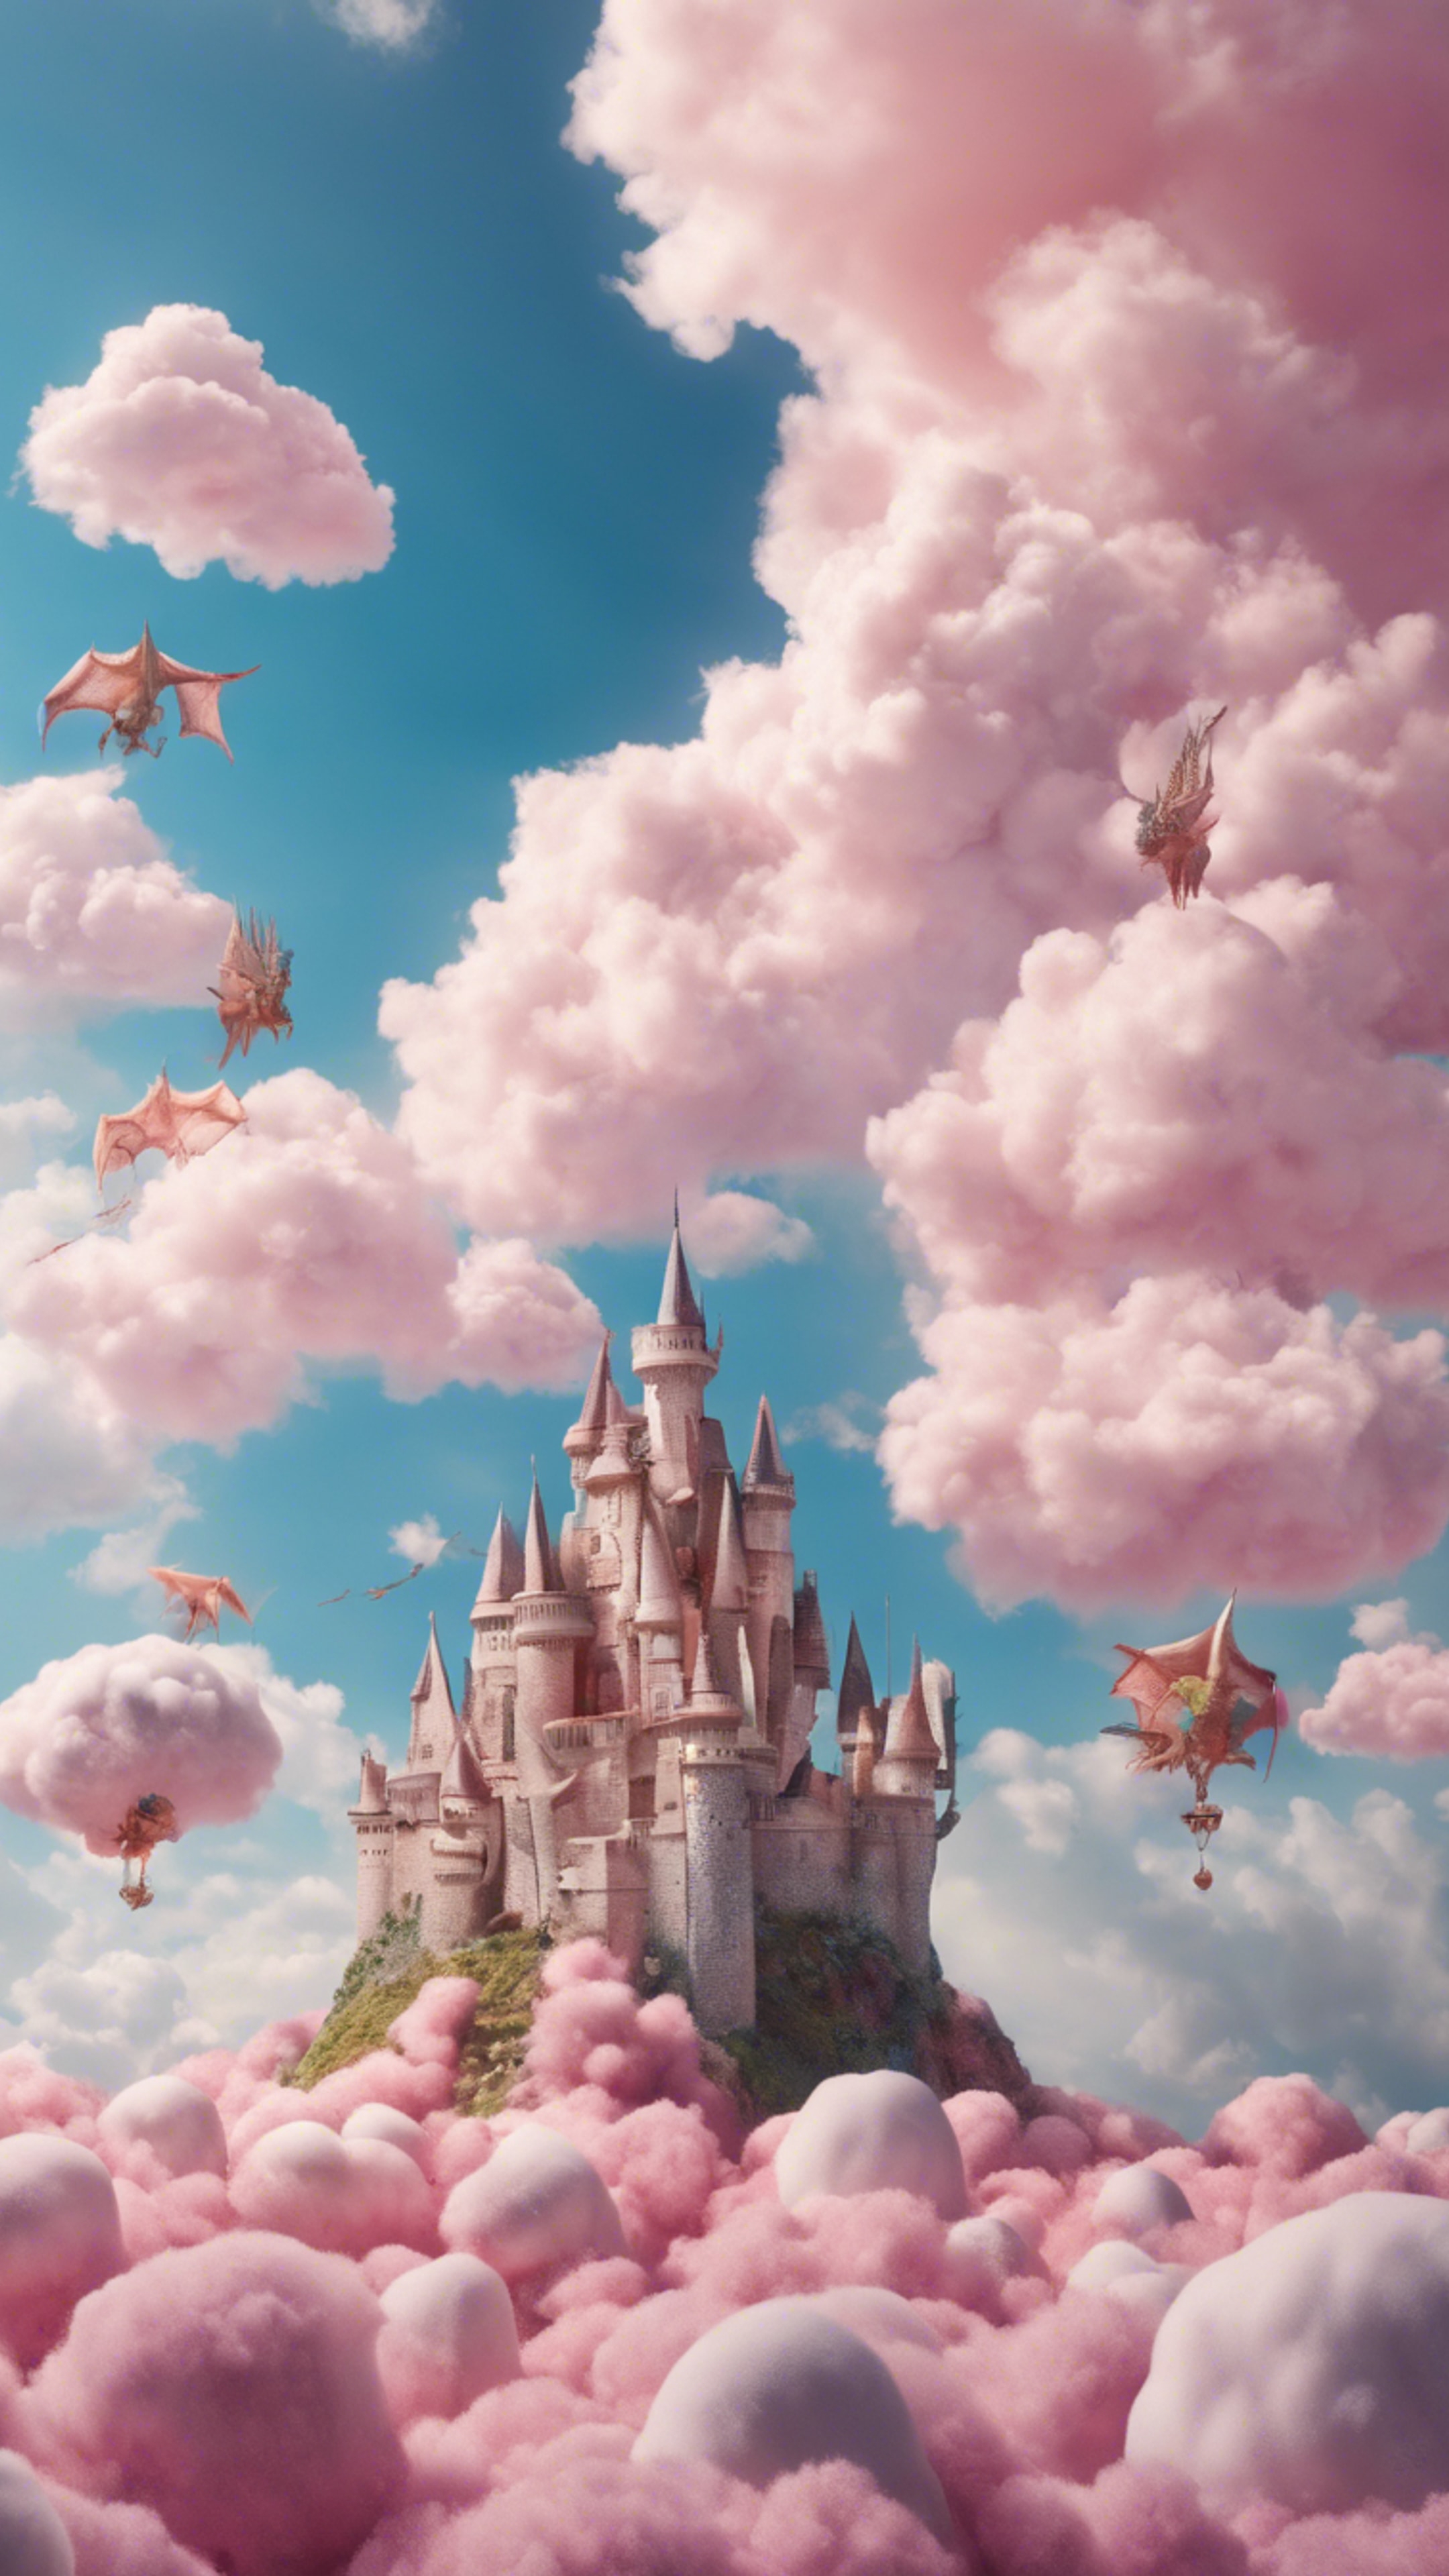 A castle floating in the sky above fluffy, cotton-candy-like clouds surrounded by a huddle of playful, magical dragons. 벽지[be63bba74c3941c98c10]